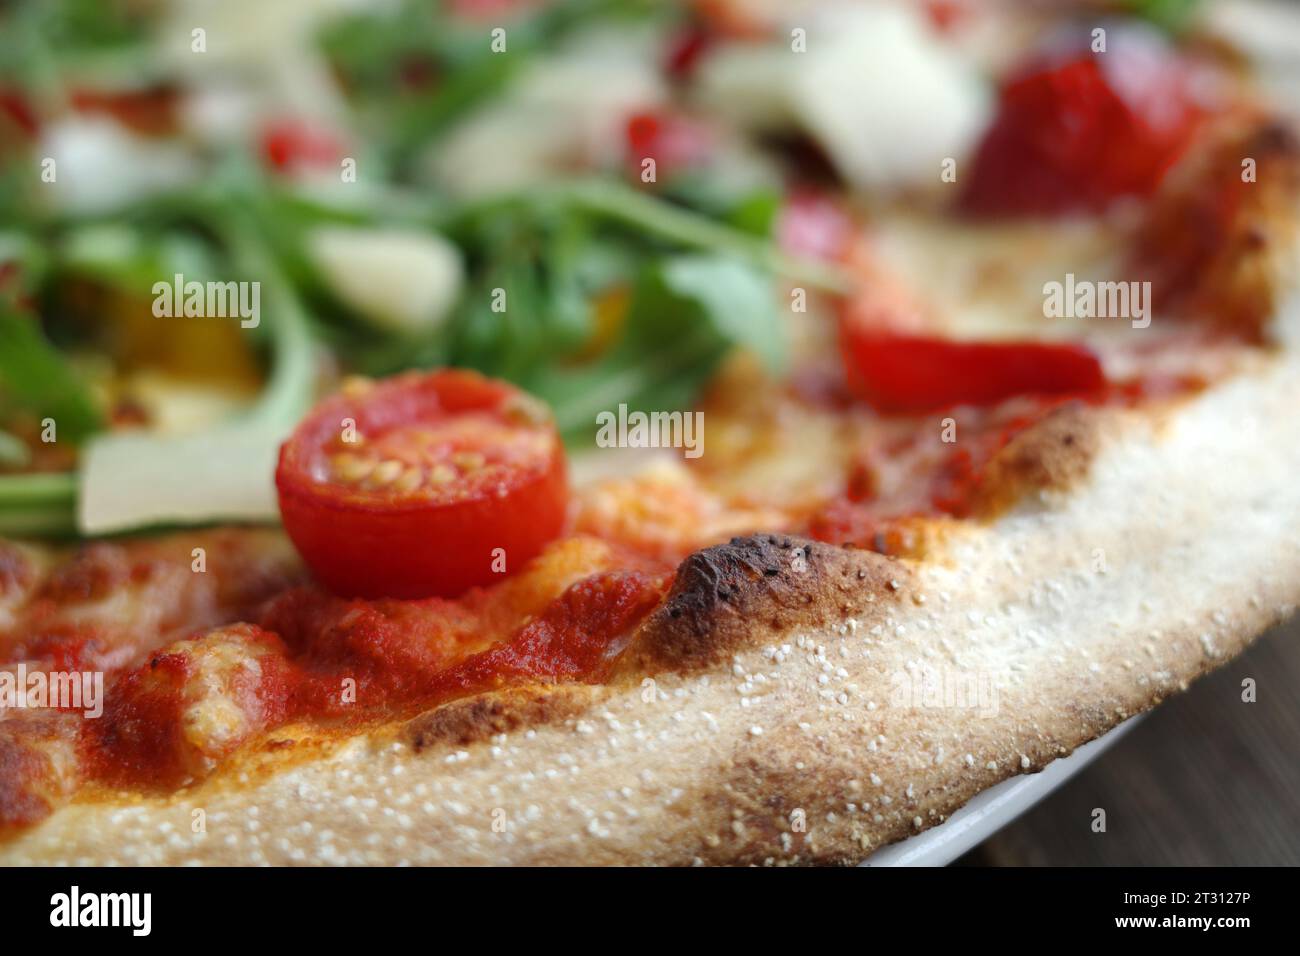 Delicious vegetarian pizza with tomatoes, arugula leaves and parmesan cheeseDelicious vegetarian pizza with tomatoes, arugula leaves and parmesan chee Stock Photo